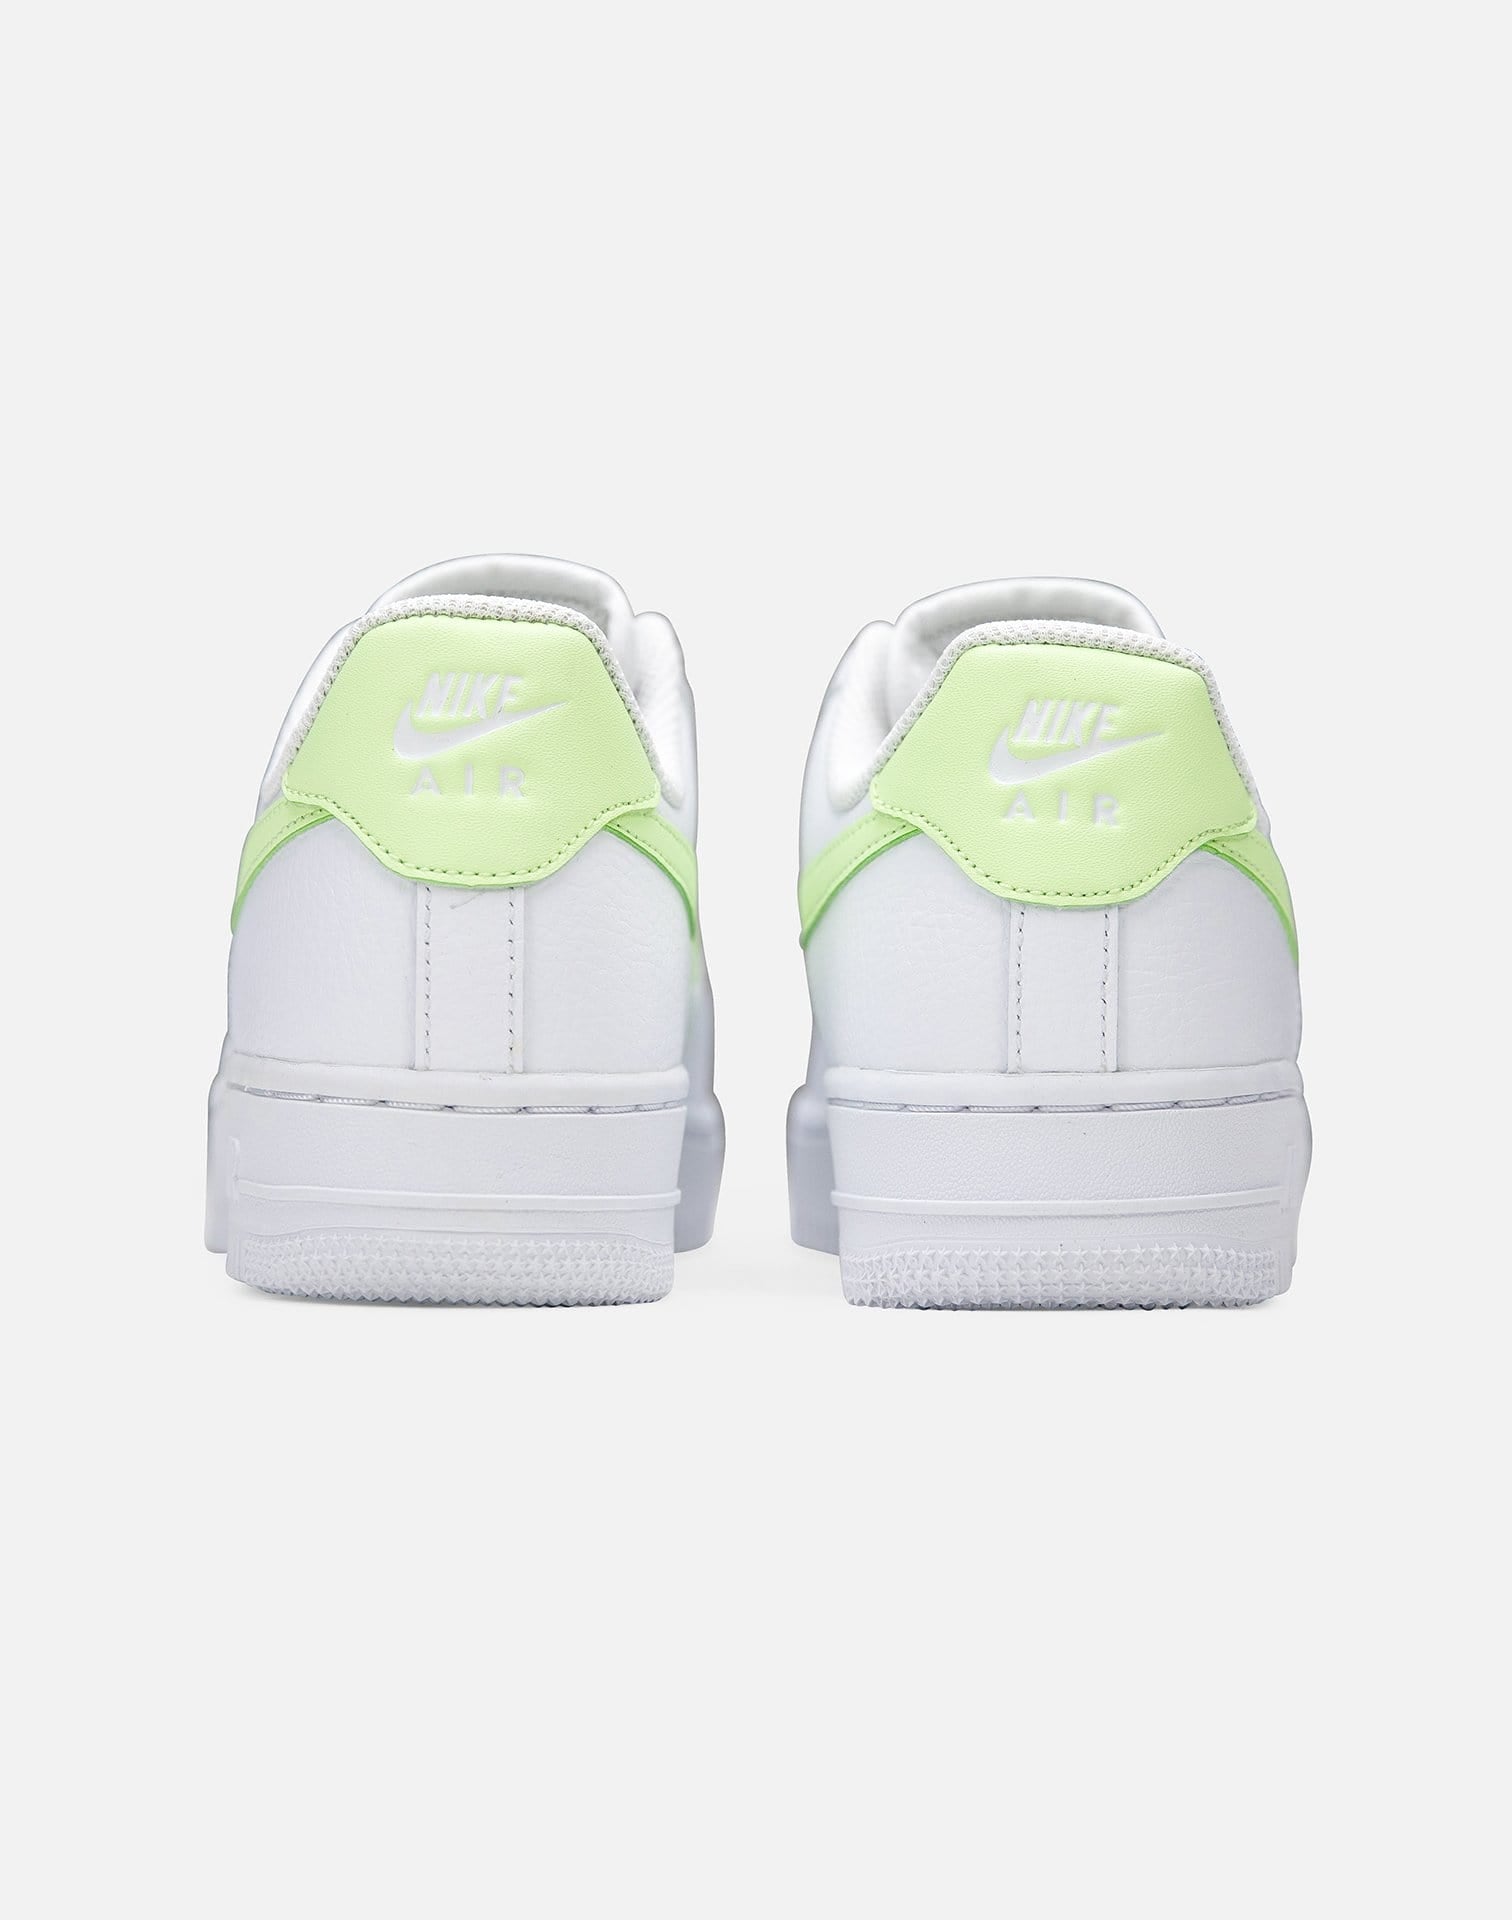 Nike WMNS AIR FORCE 1 '07 – DTLR